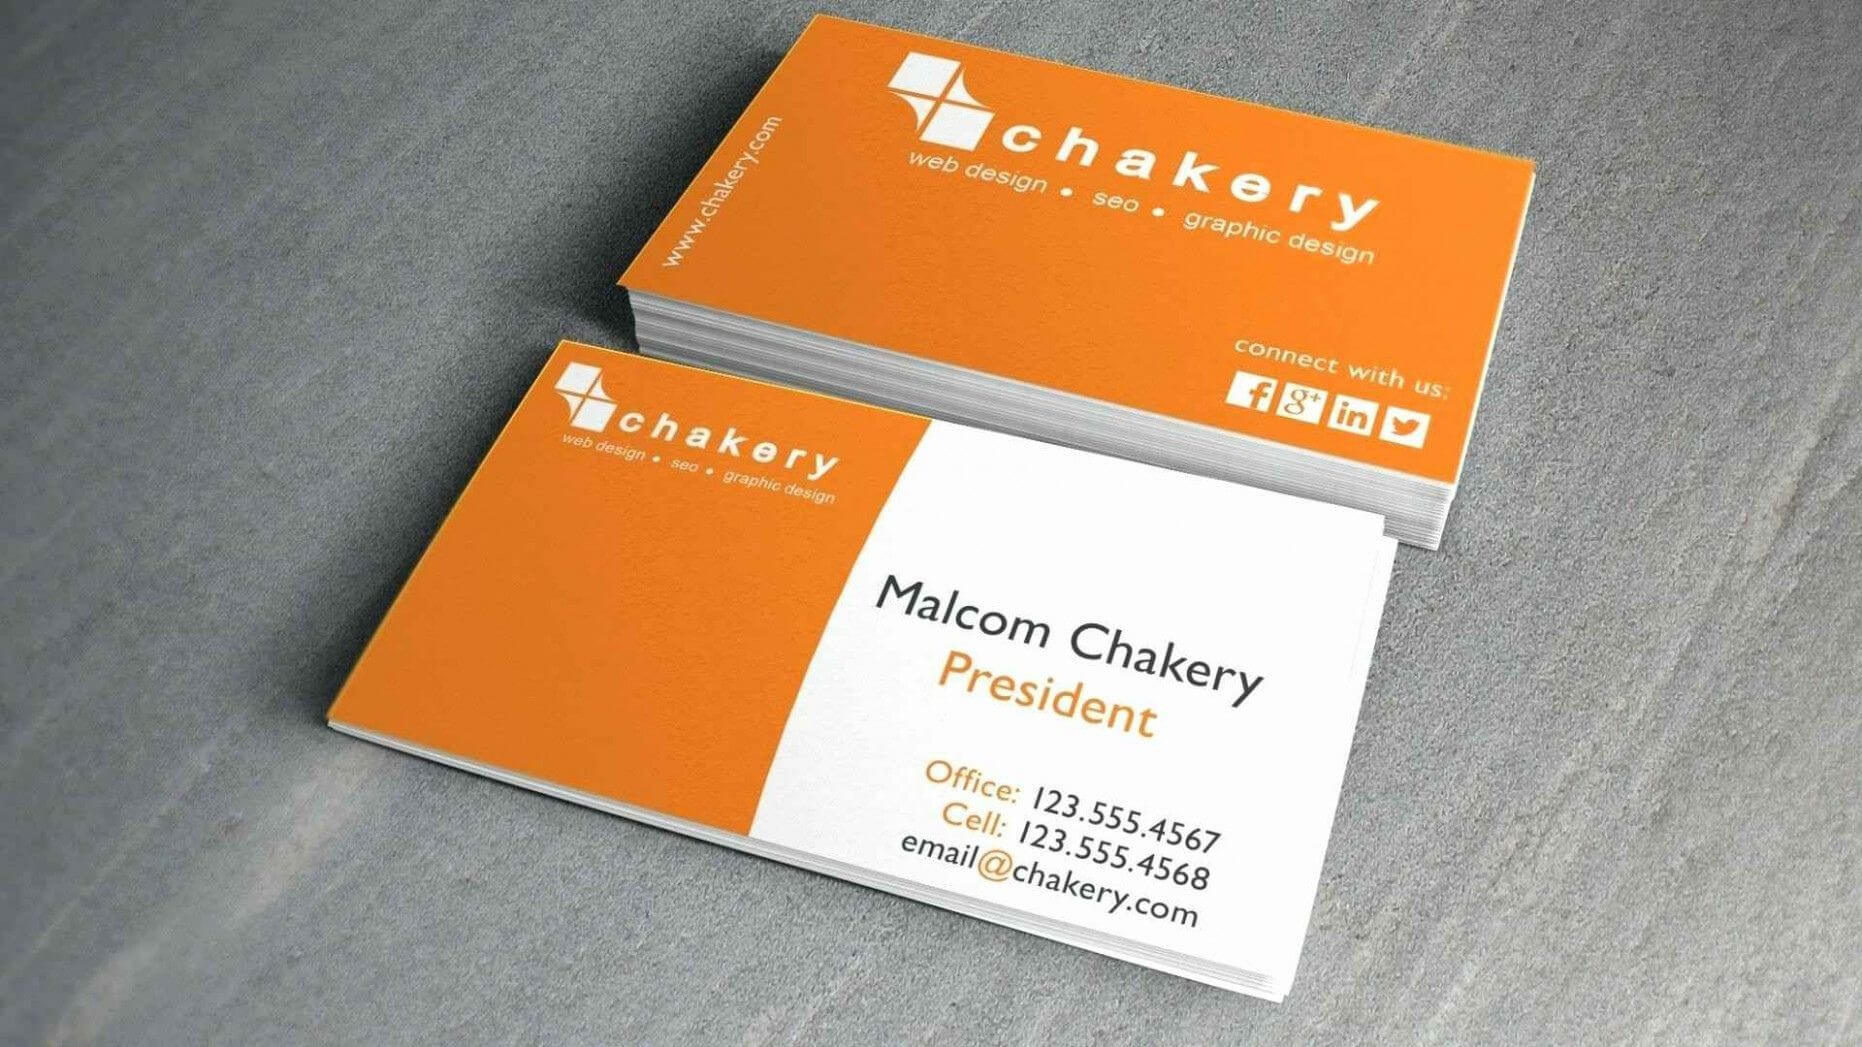 Pinanggunstore On Business Cards Intended For Office Depot Business Card Template